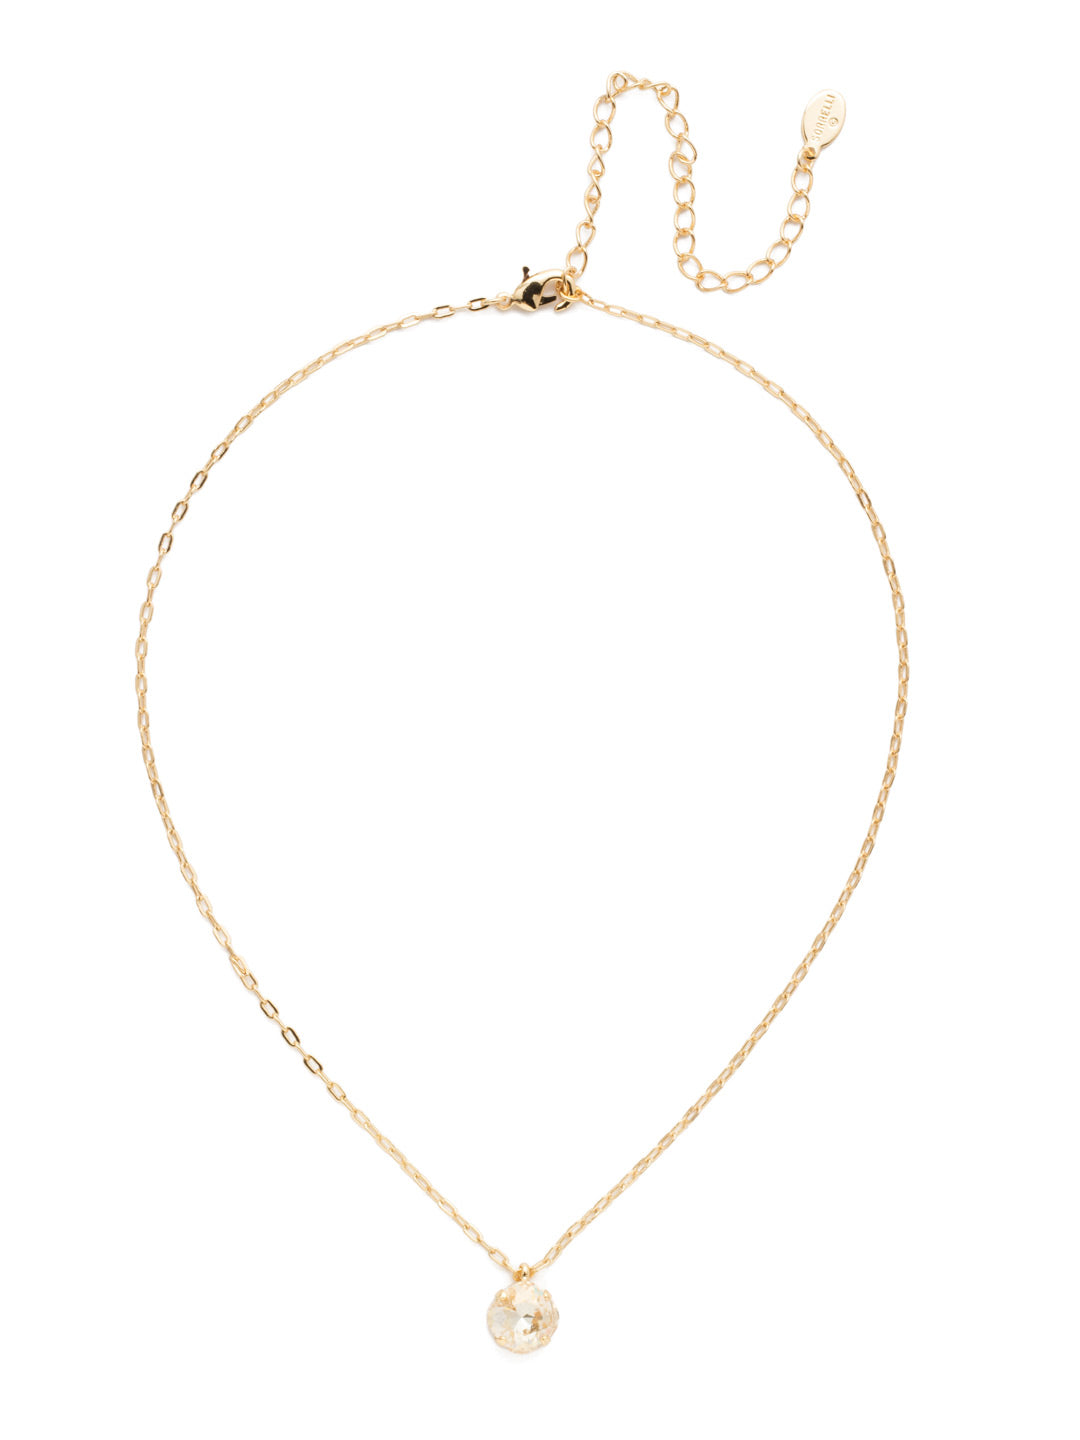 Siren Pendant Necklace - NEP22BGCCH - <p>With a cushion-cut crystal and delicate chain, the Siren Pendant  will add a litle sparkle to your everyday look. From Sorrelli's Crystal Champagne collection in our Bright Gold-tone finish.</p>